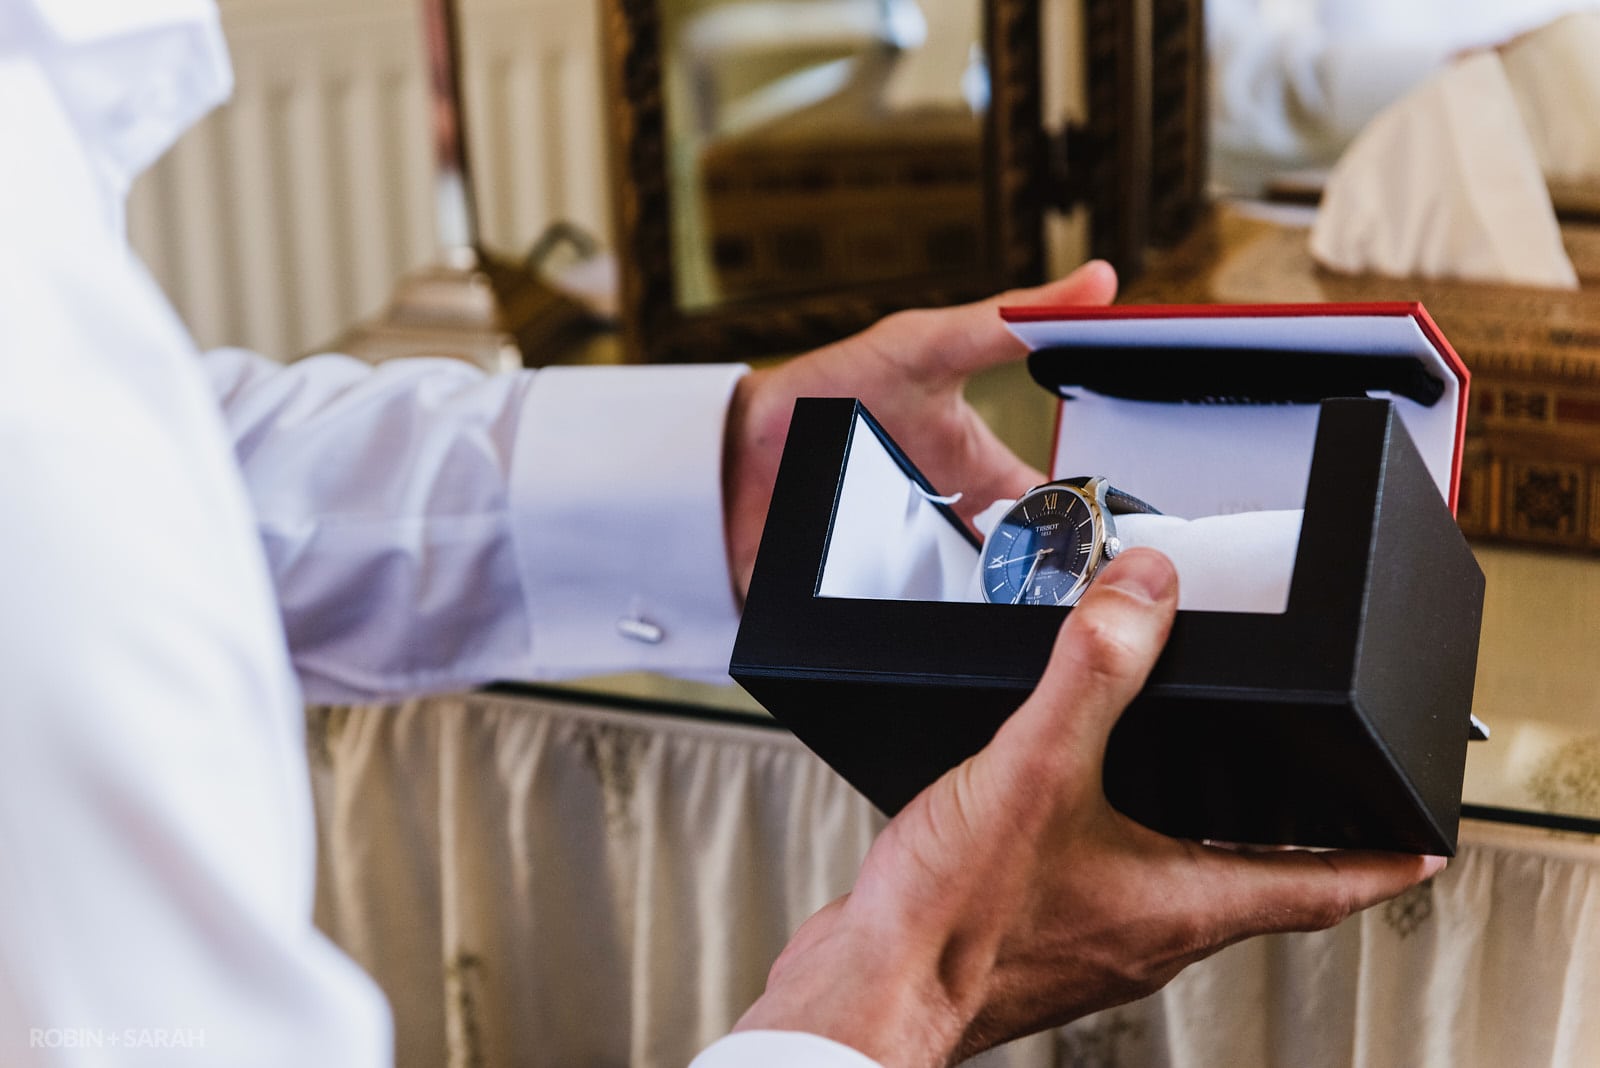 Groom opens gift of an expensive watch